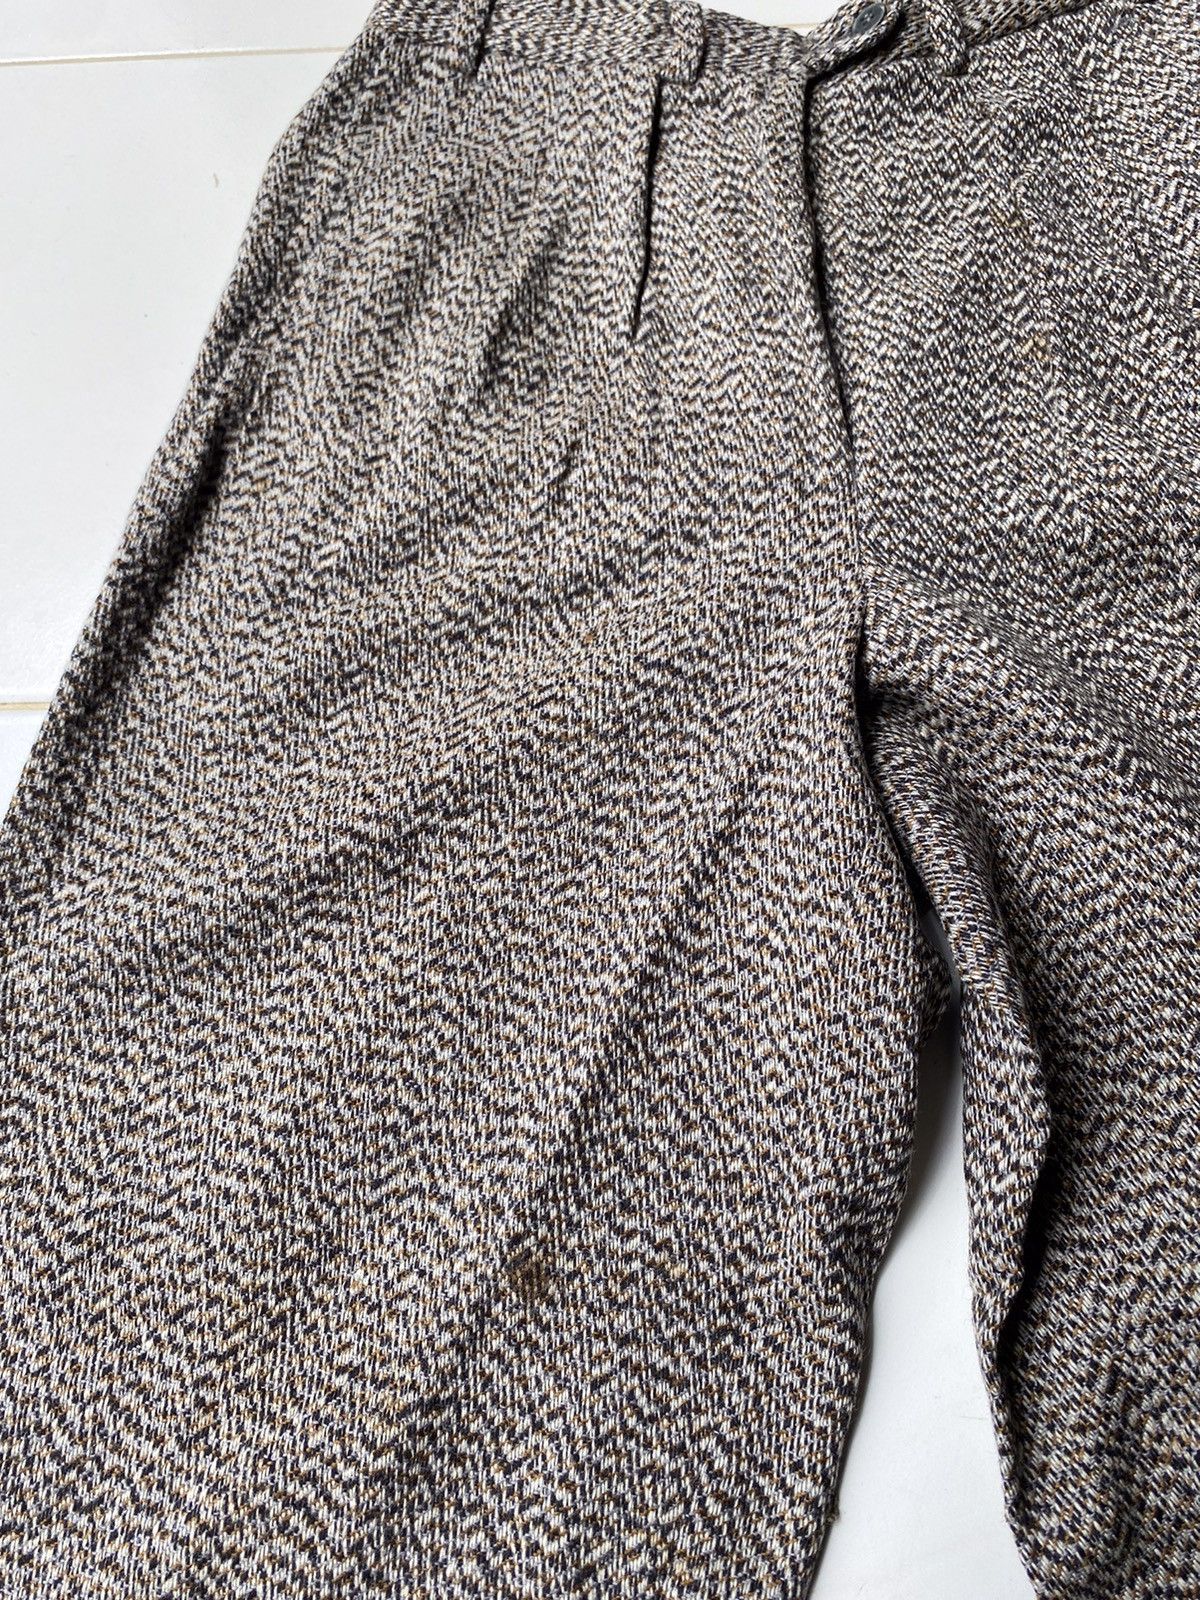 Vintage Giorgio Armani Wool Pants Made In Italy -R6 - 8